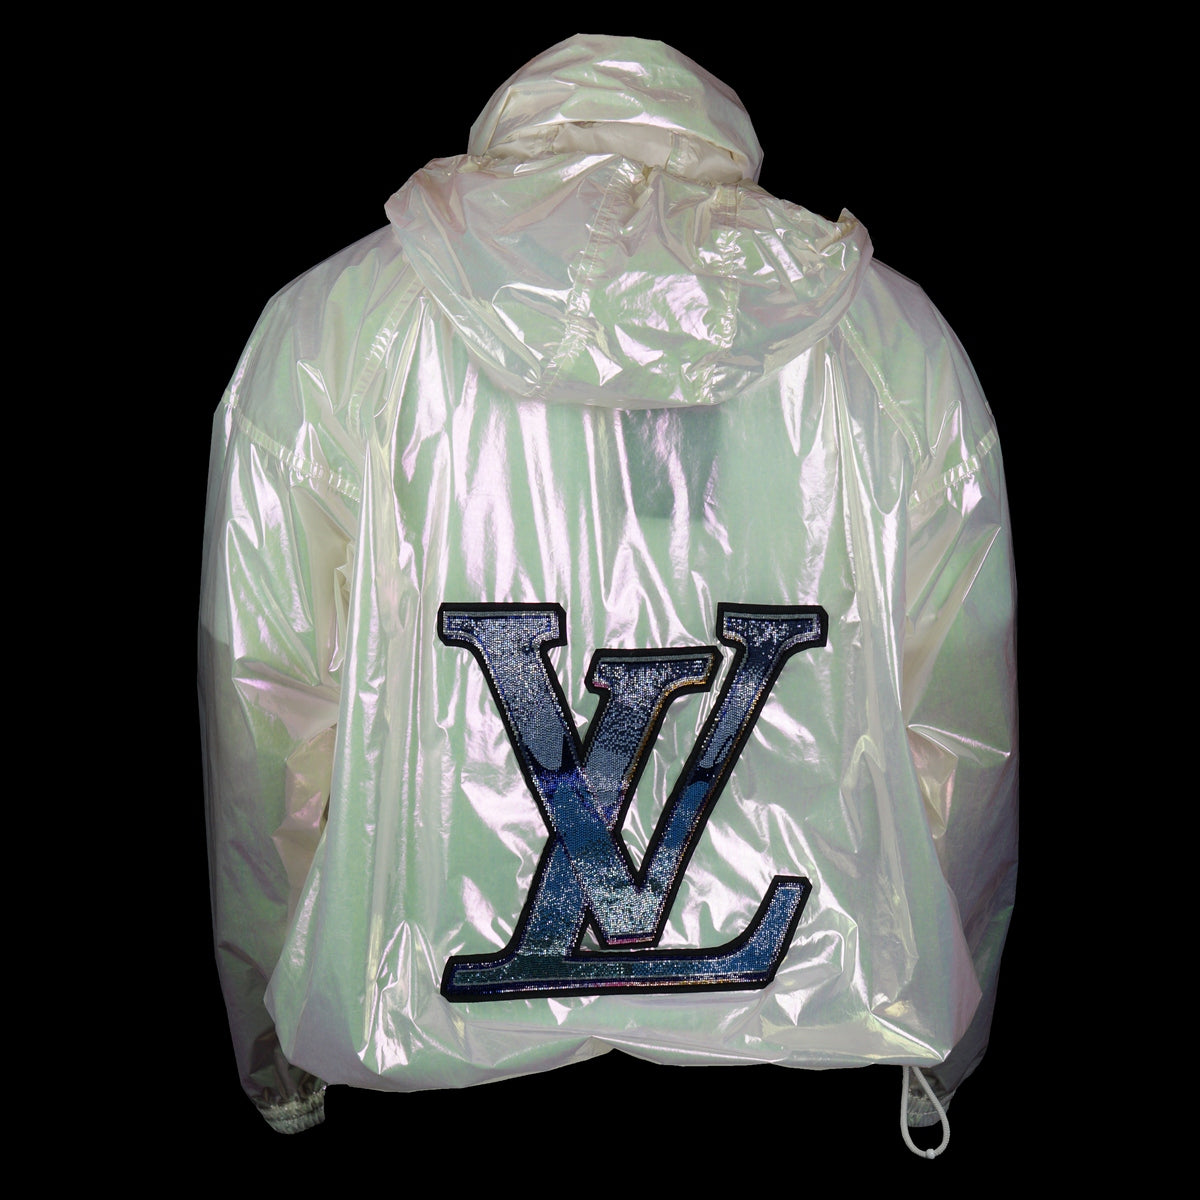 BRAND NEW LV WINDBREAKER for Sale in Queens, NY - OfferUp